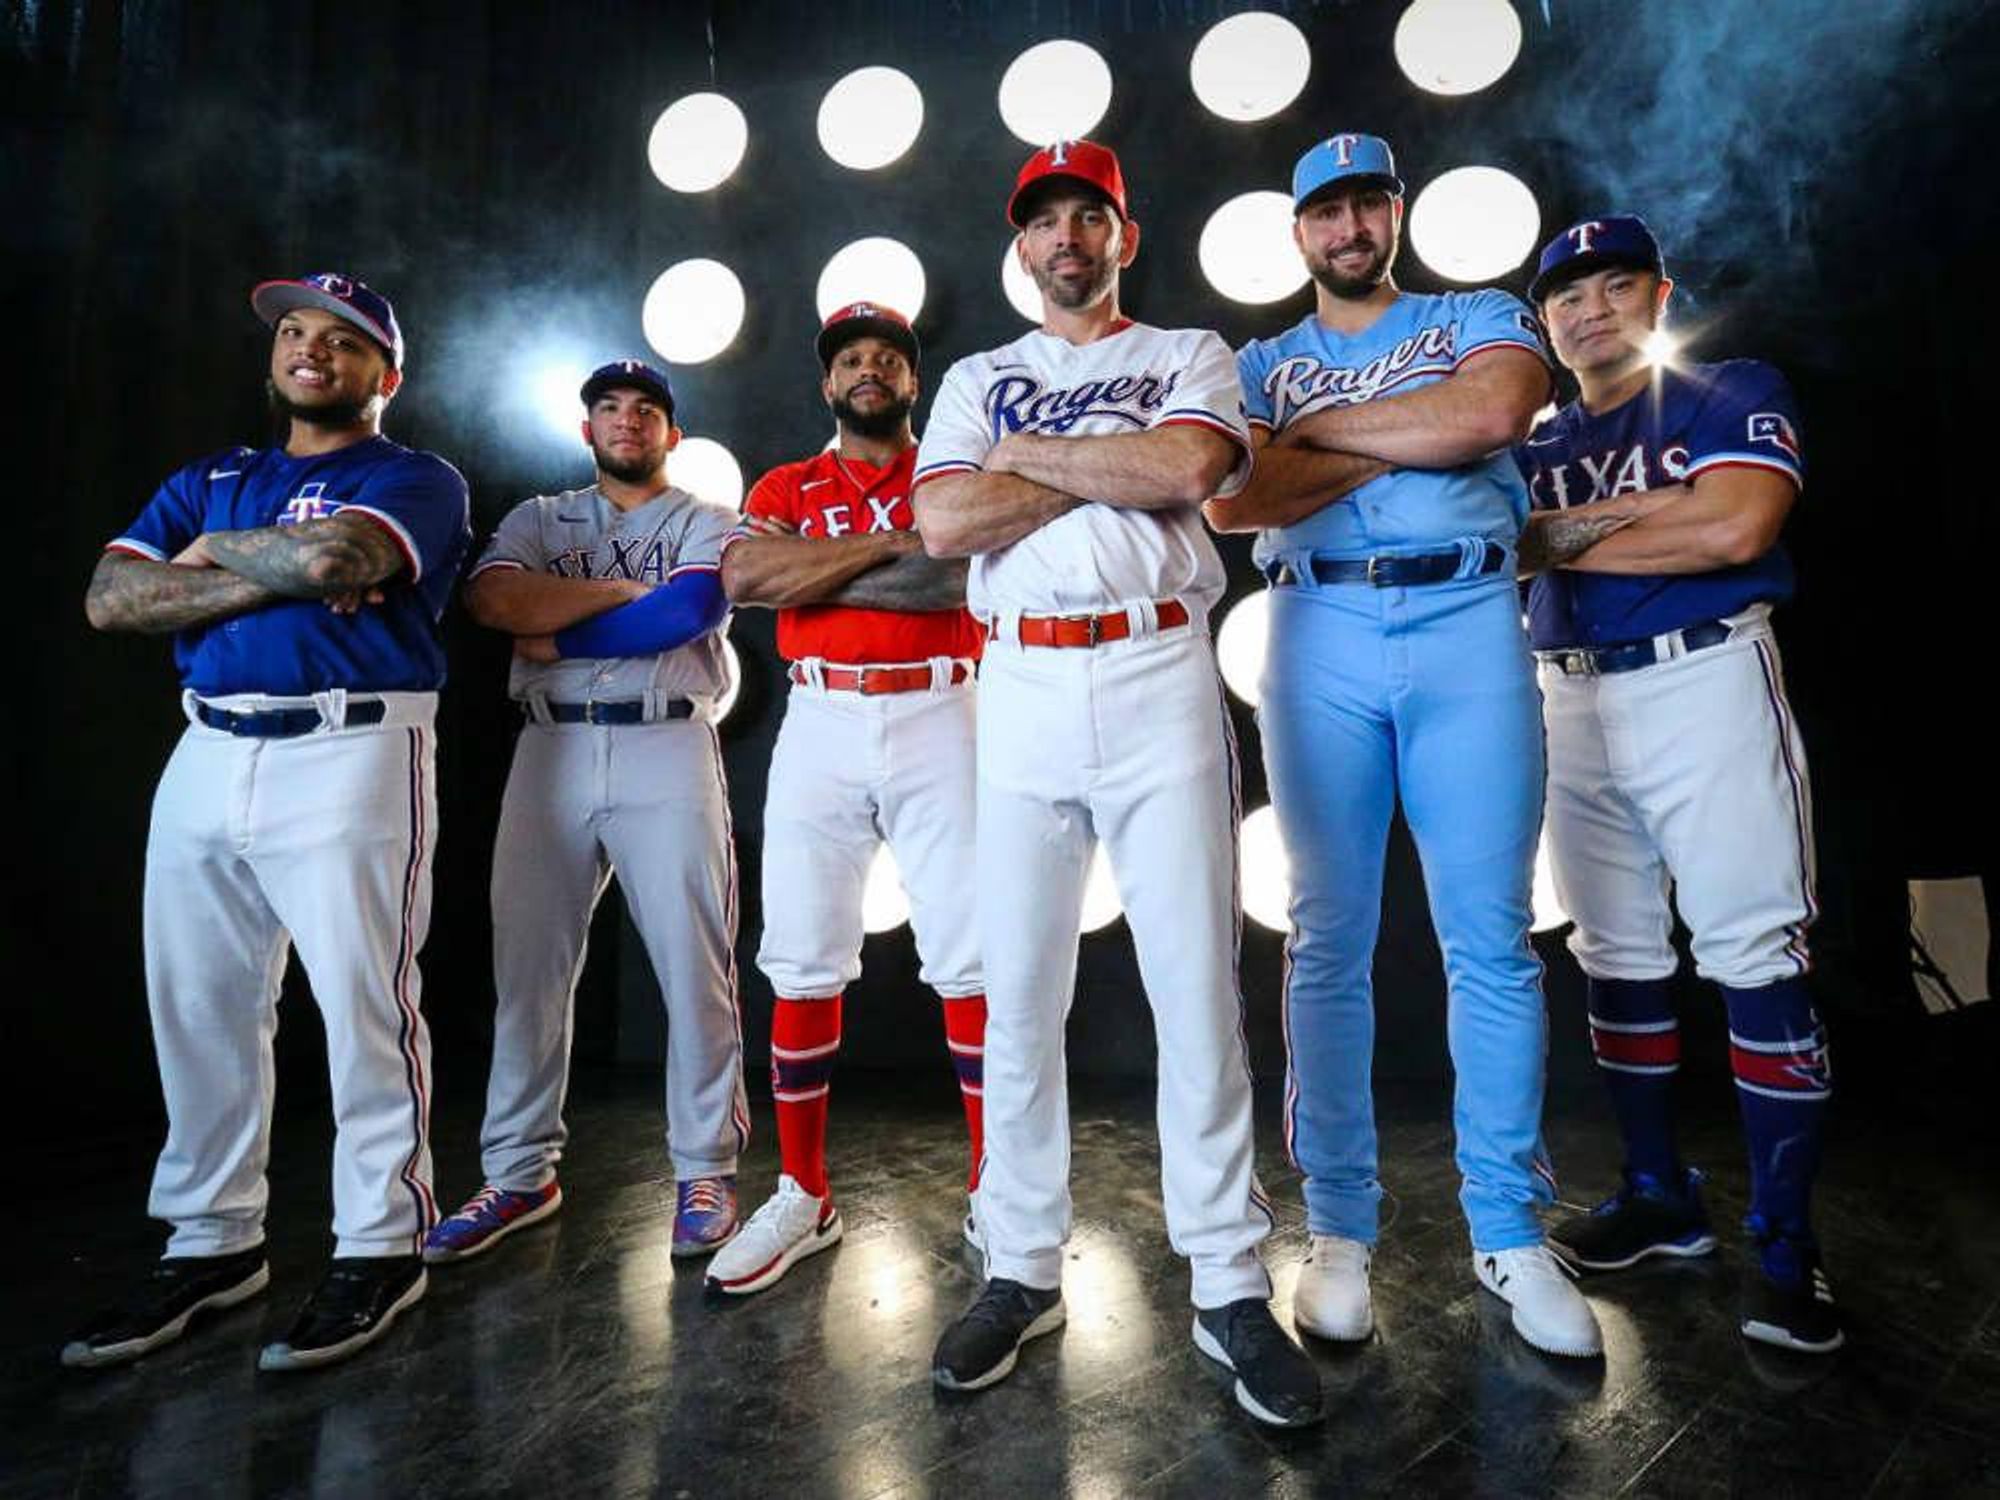 Check out the Texas Rangers' colorful new uniforms for the 2020